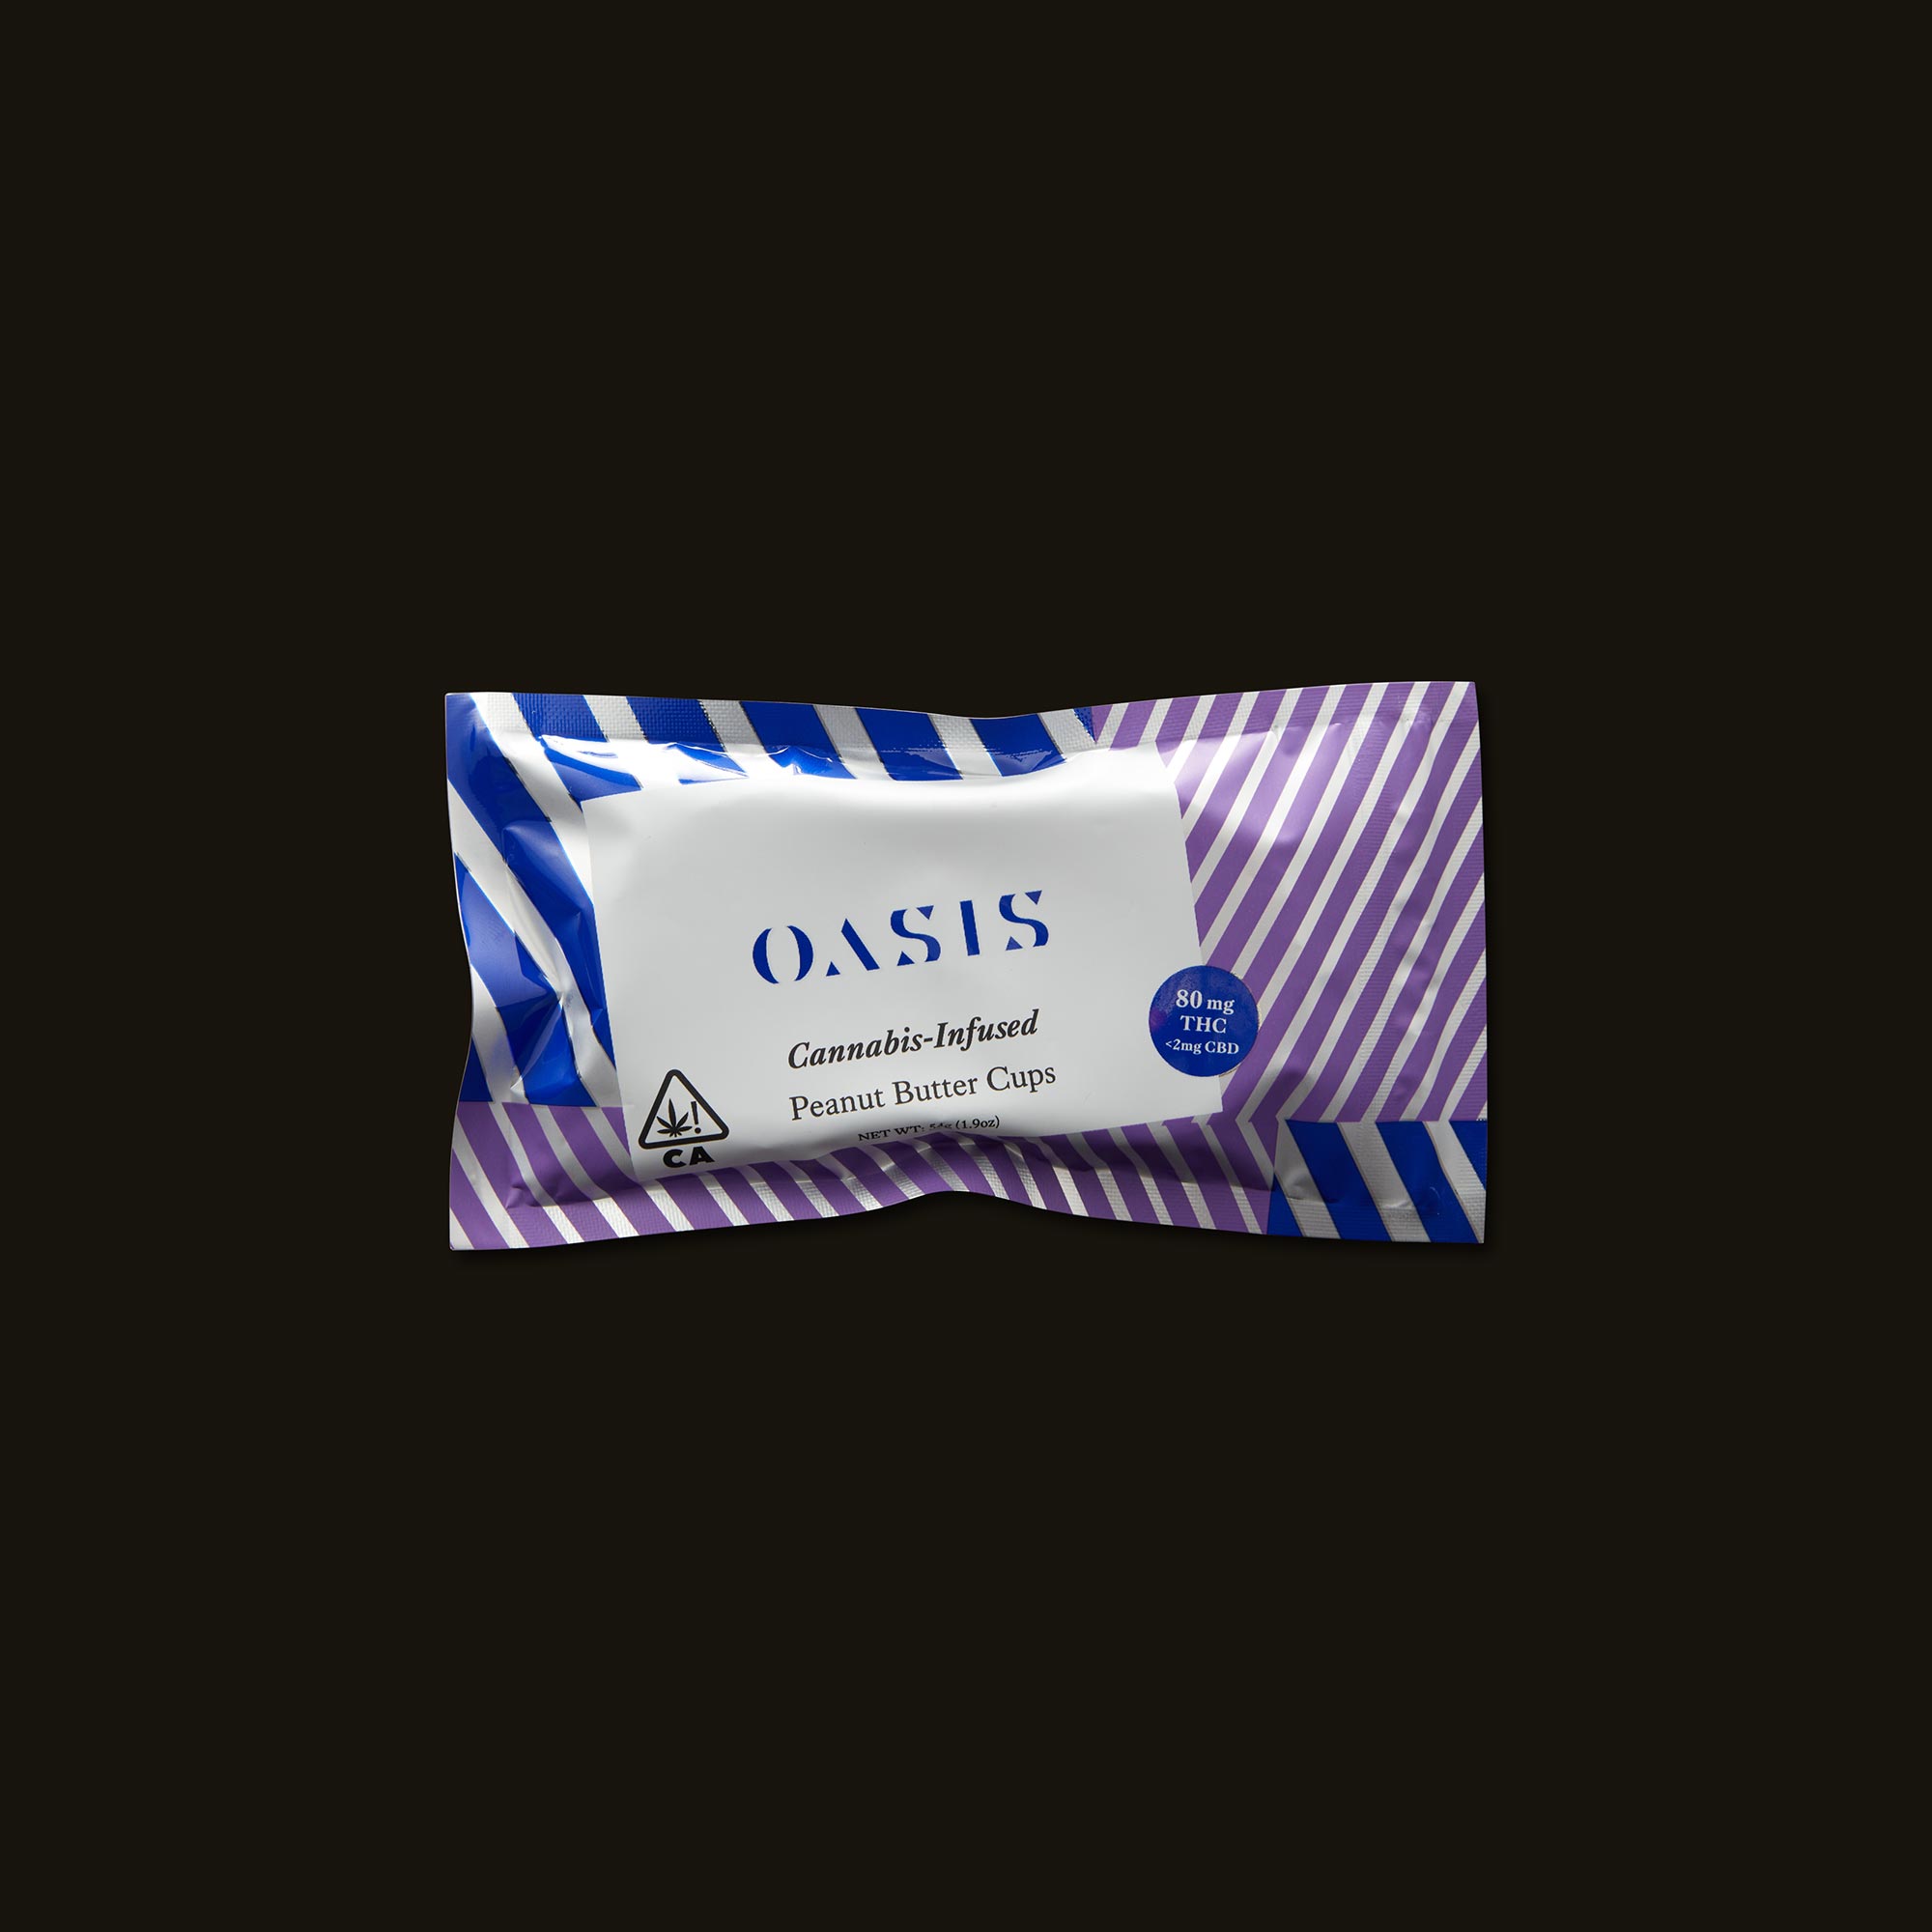 Oasis-Peanut-Butter-Cups-Edible-Front-Packaging-CA-200485-811932